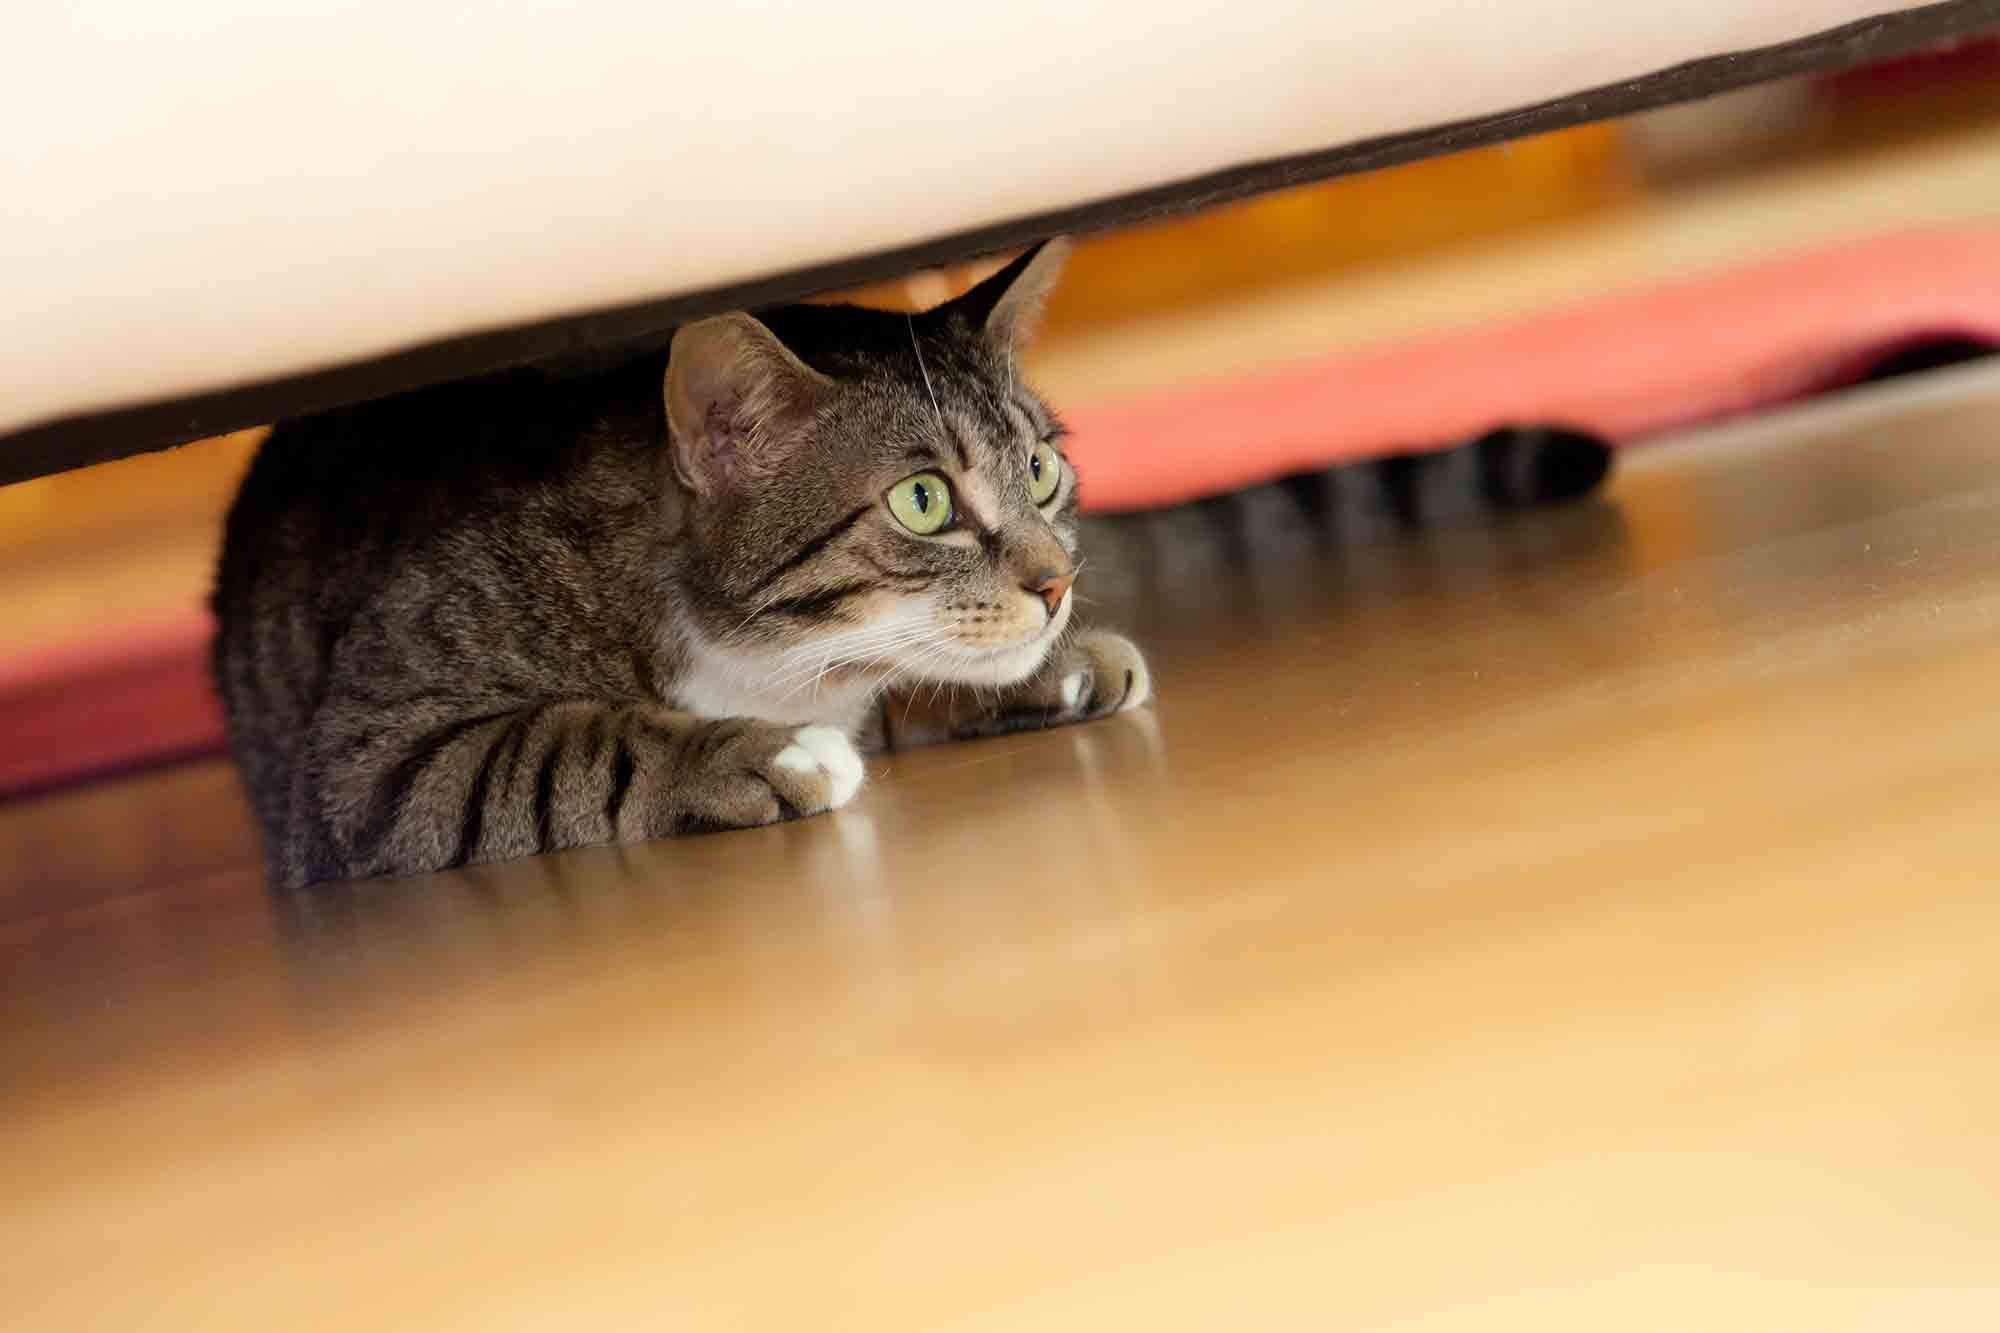 Striped cat under a couch